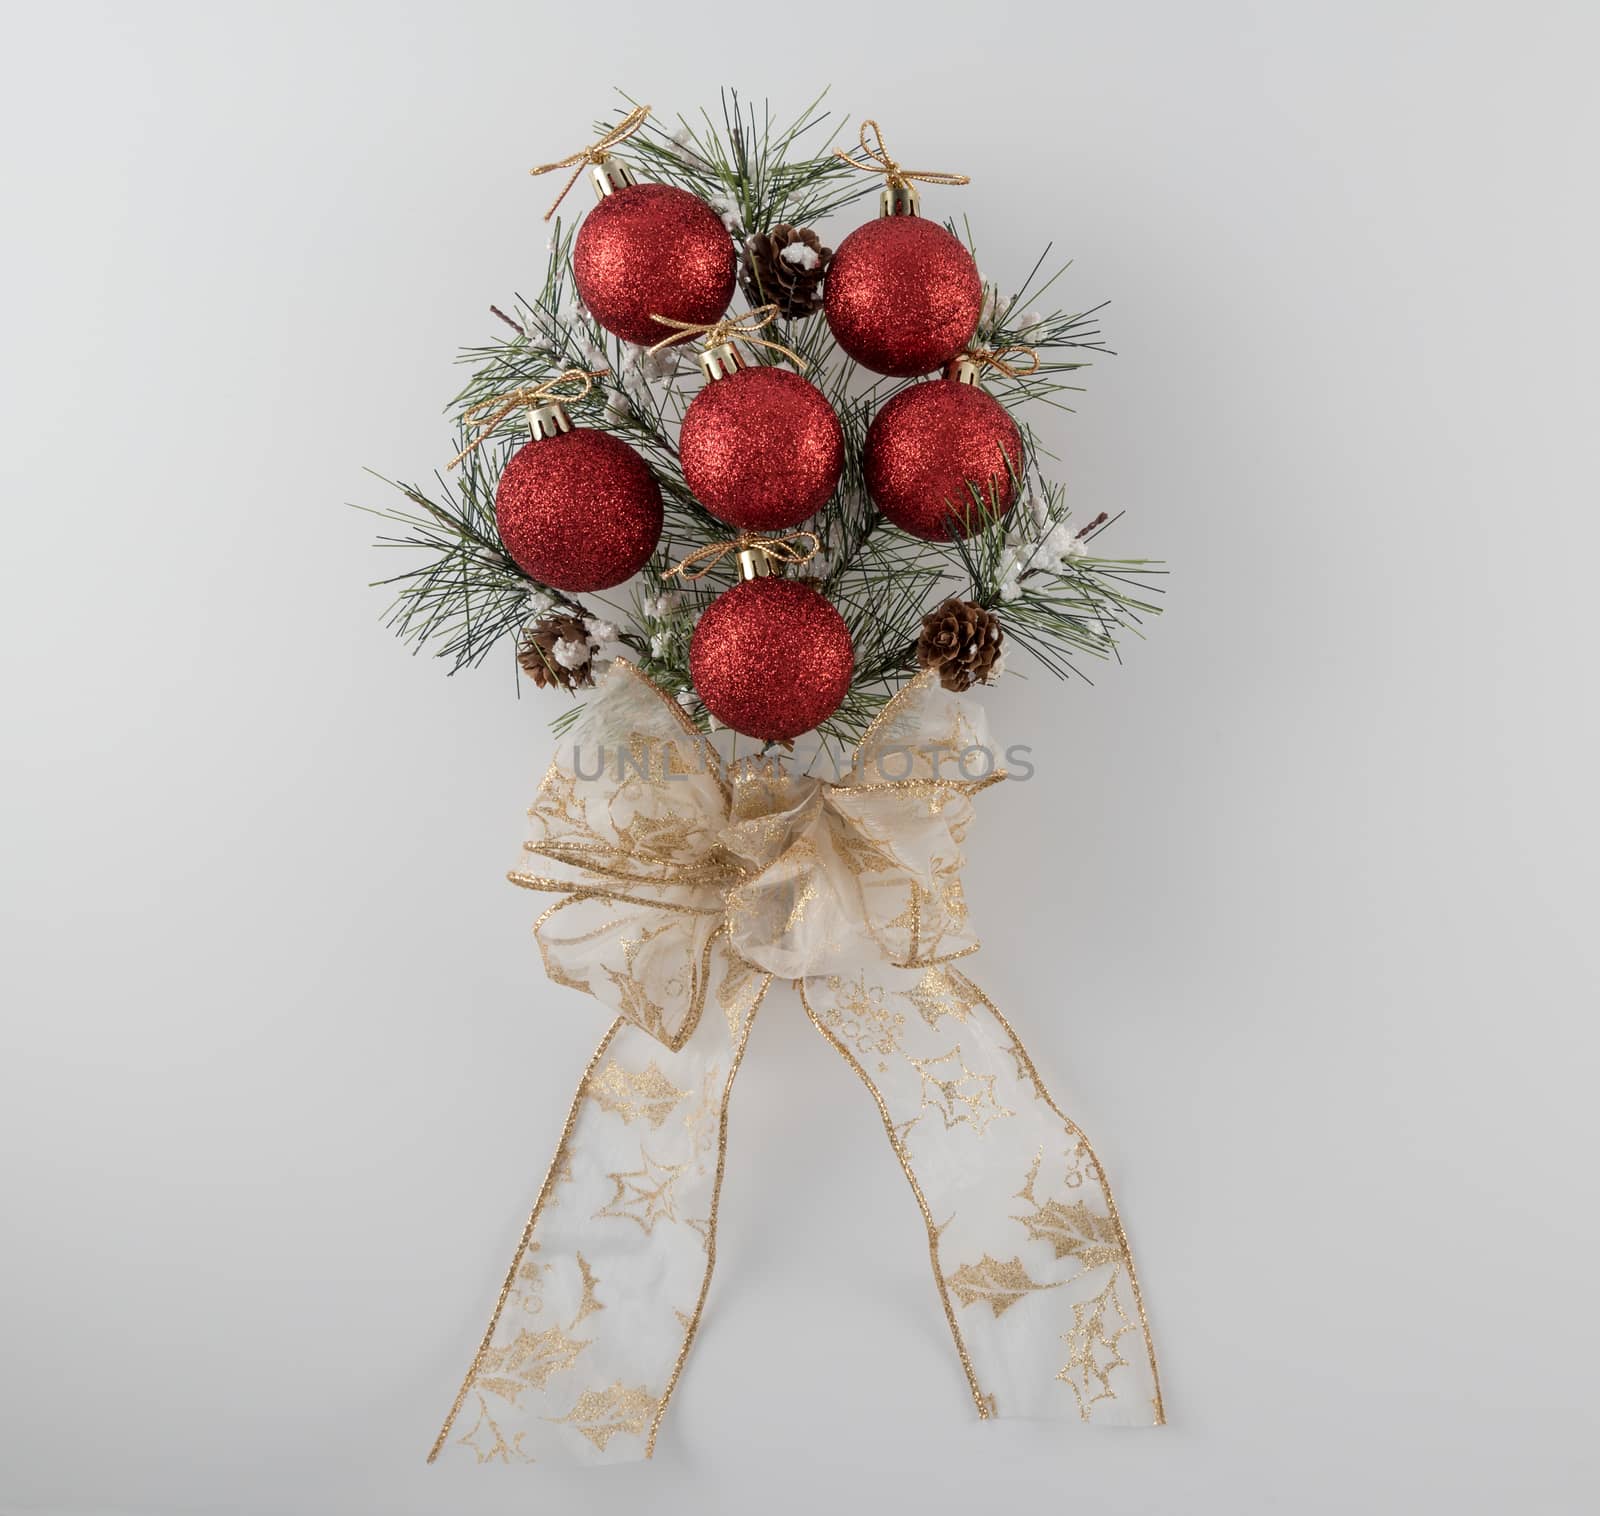 Pine Bough Christmas Decoration by krisblackphotography